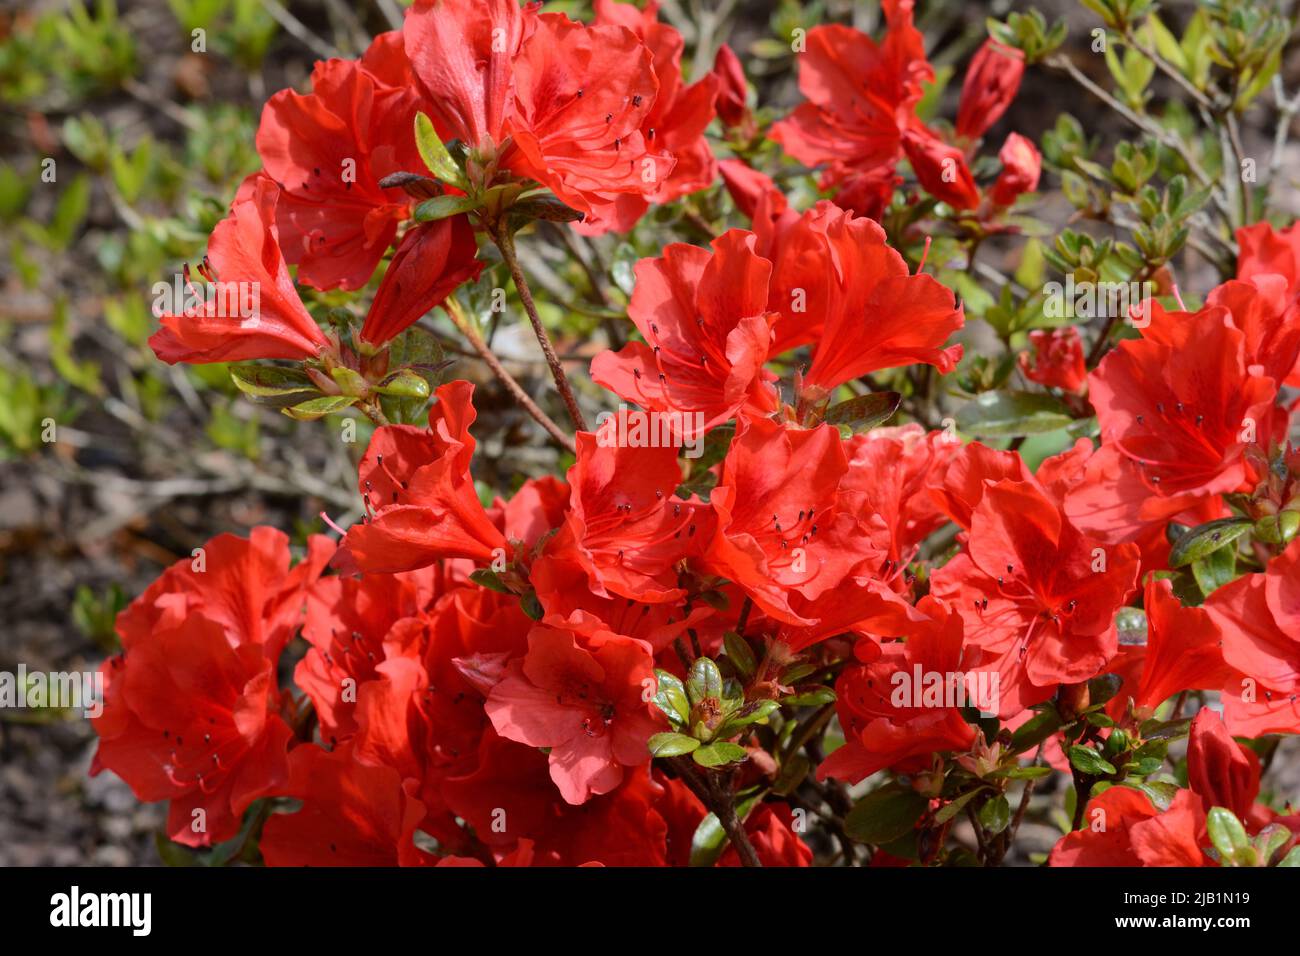 Rhododendron Santa Maria small compact evergreen azalea clusters of orange-red funnel shaped flowers Stock Photo